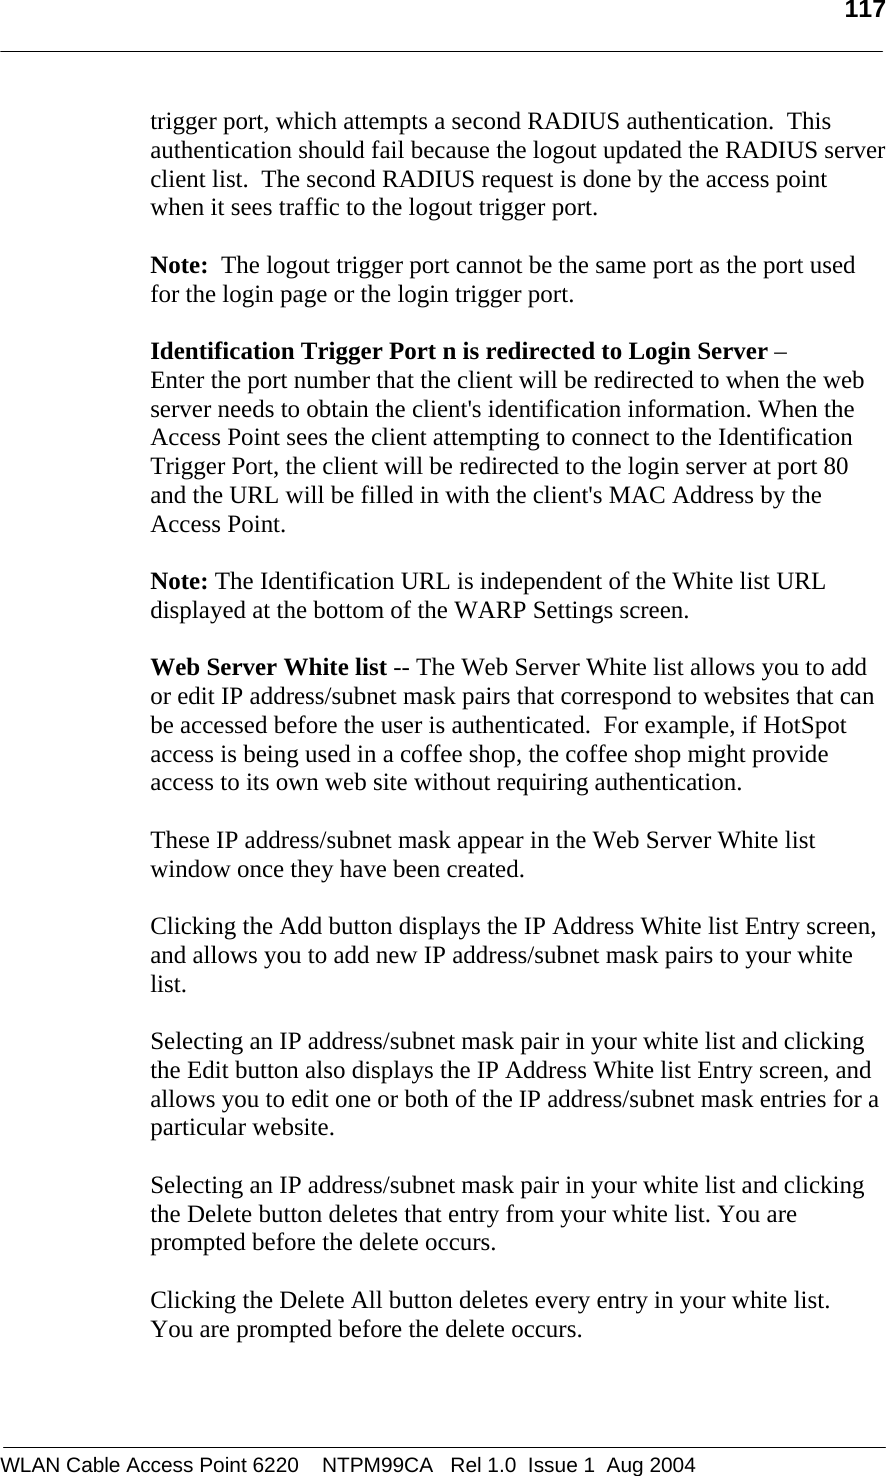   117  trigger port, which attempts a second RADIUS authentication.  This authentication should fail because the logout updated the RADIUS server client list.  The second RADIUS request is done by the access point when it sees traffic to the logout trigger port.  Note:  The logout trigger port cannot be the same port as the port used for the login page or the login trigger port.  Identification Trigger Port n is redirected to Login Server –  Enter the port number that the client will be redirected to when the web server needs to obtain the client&apos;s identification information. When the Access Point sees the client attempting to connect to the Identification Trigger Port, the client will be redirected to the login server at port 80 and the URL will be filled in with the client&apos;s MAC Address by the Access Point.   Note: The Identification URL is independent of the White list URL displayed at the bottom of the WARP Settings screen.  Web Server White list -- The Web Server White list allows you to add or edit IP address/subnet mask pairs that correspond to websites that can be accessed before the user is authenticated.  For example, if HotSpot access is being used in a coffee shop, the coffee shop might provide access to its own web site without requiring authentication.  These IP address/subnet mask appear in the Web Server White list window once they have been created.  Clicking the Add button displays the IP Address White list Entry screen, and allows you to add new IP address/subnet mask pairs to your white list.  Selecting an IP address/subnet mask pair in your white list and clicking the Edit button also displays the IP Address White list Entry screen, and allows you to edit one or both of the IP address/subnet mask entries for a particular website.    Selecting an IP address/subnet mask pair in your white list and clicking the Delete button deletes that entry from your white list. You are prompted before the delete occurs.  Clicking the Delete All button deletes every entry in your white list.  You are prompted before the delete occurs.  WLAN Cable Access Point 6220    NTPM99CA   Rel 1.0  Issue 1  Aug 2004 